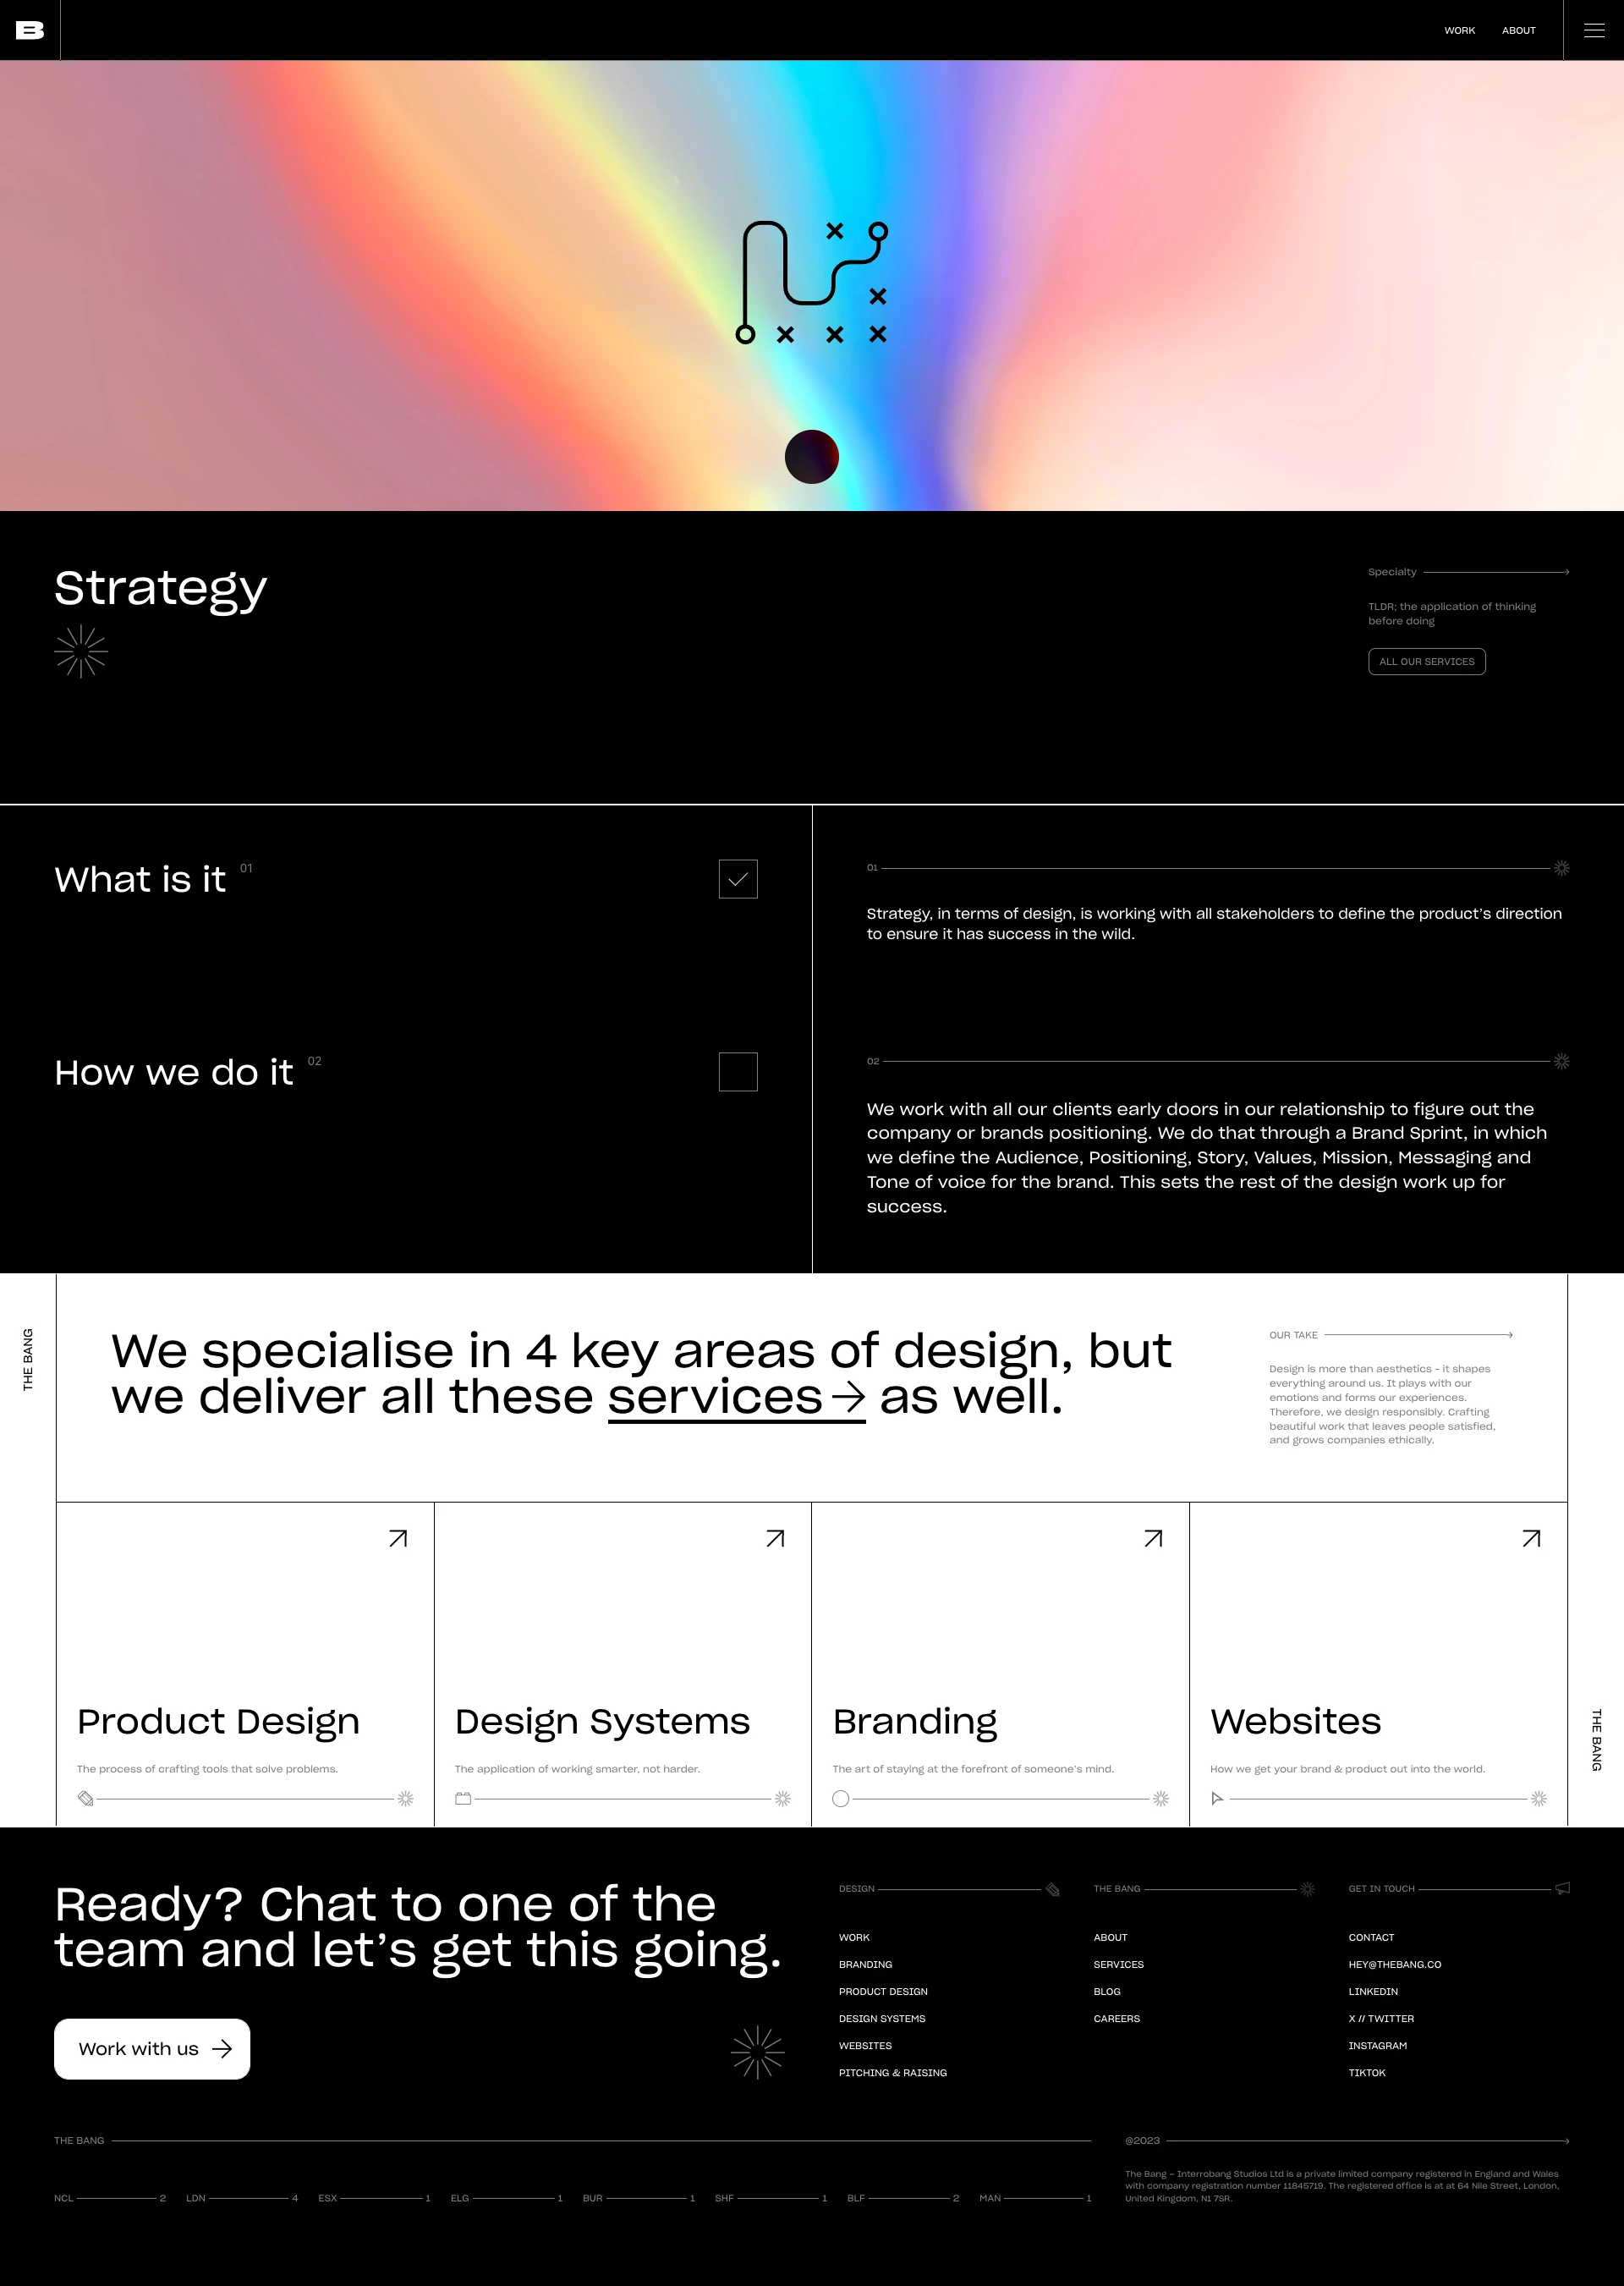 The Bang Landing Page Example: The Bang is a remote design studio crafting truly magnetic brands and disruptive products for companies looking to drive change.